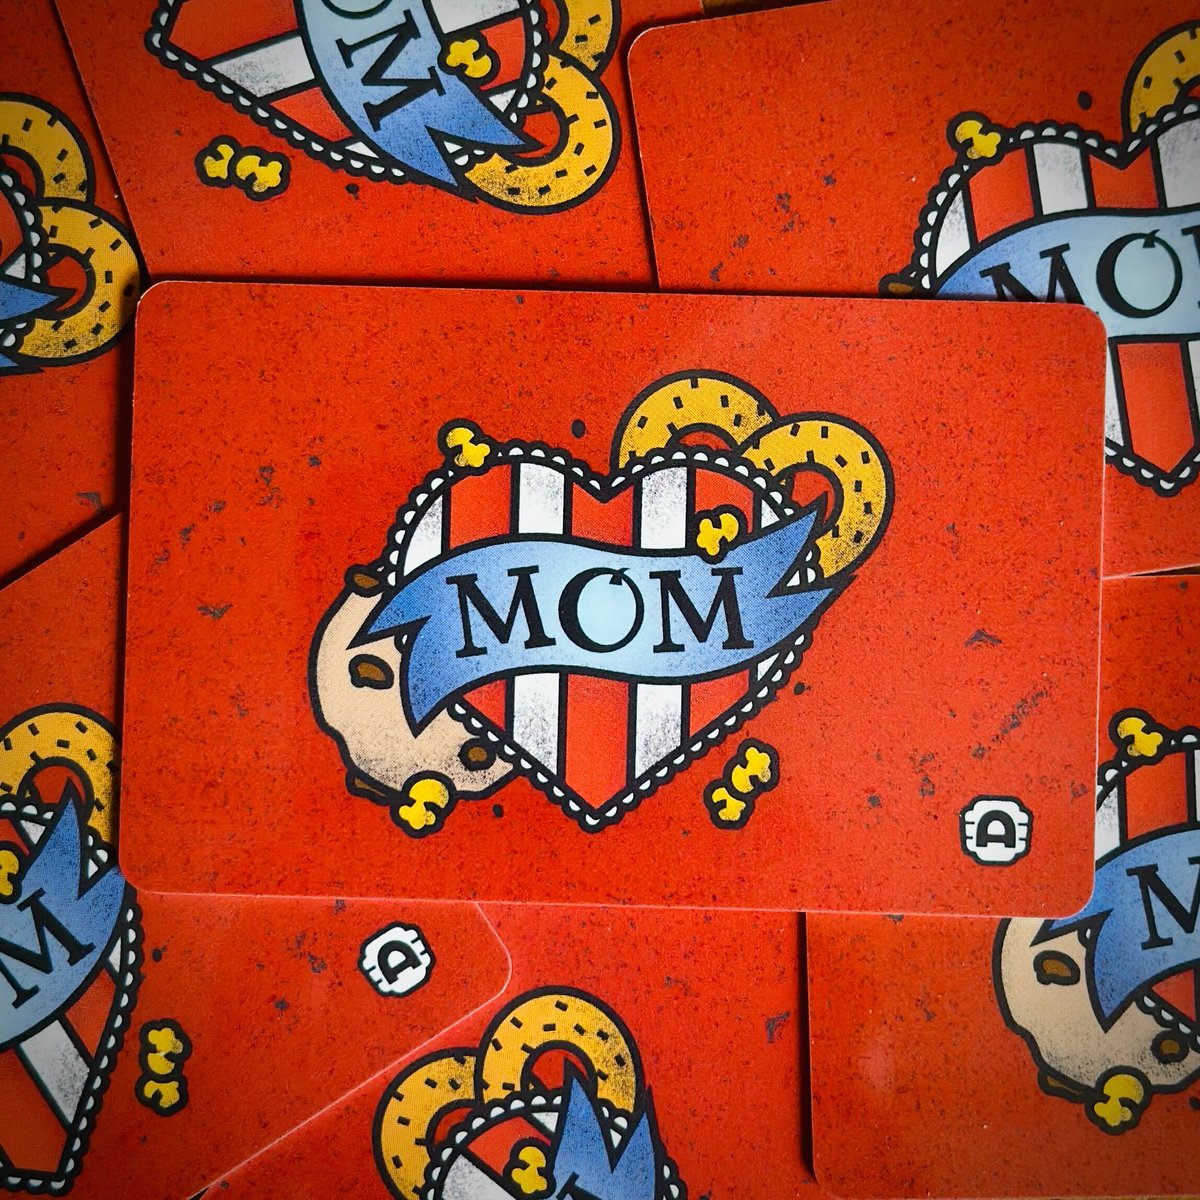 Your mom needs a gift, you need to save 20%, we’ve got you covered. Get 20% off all $50+ gift cards you buy online by 5/12 – that’s Mother’s Day, just FYI. Learn more here: drafthouse.com/gift-cards